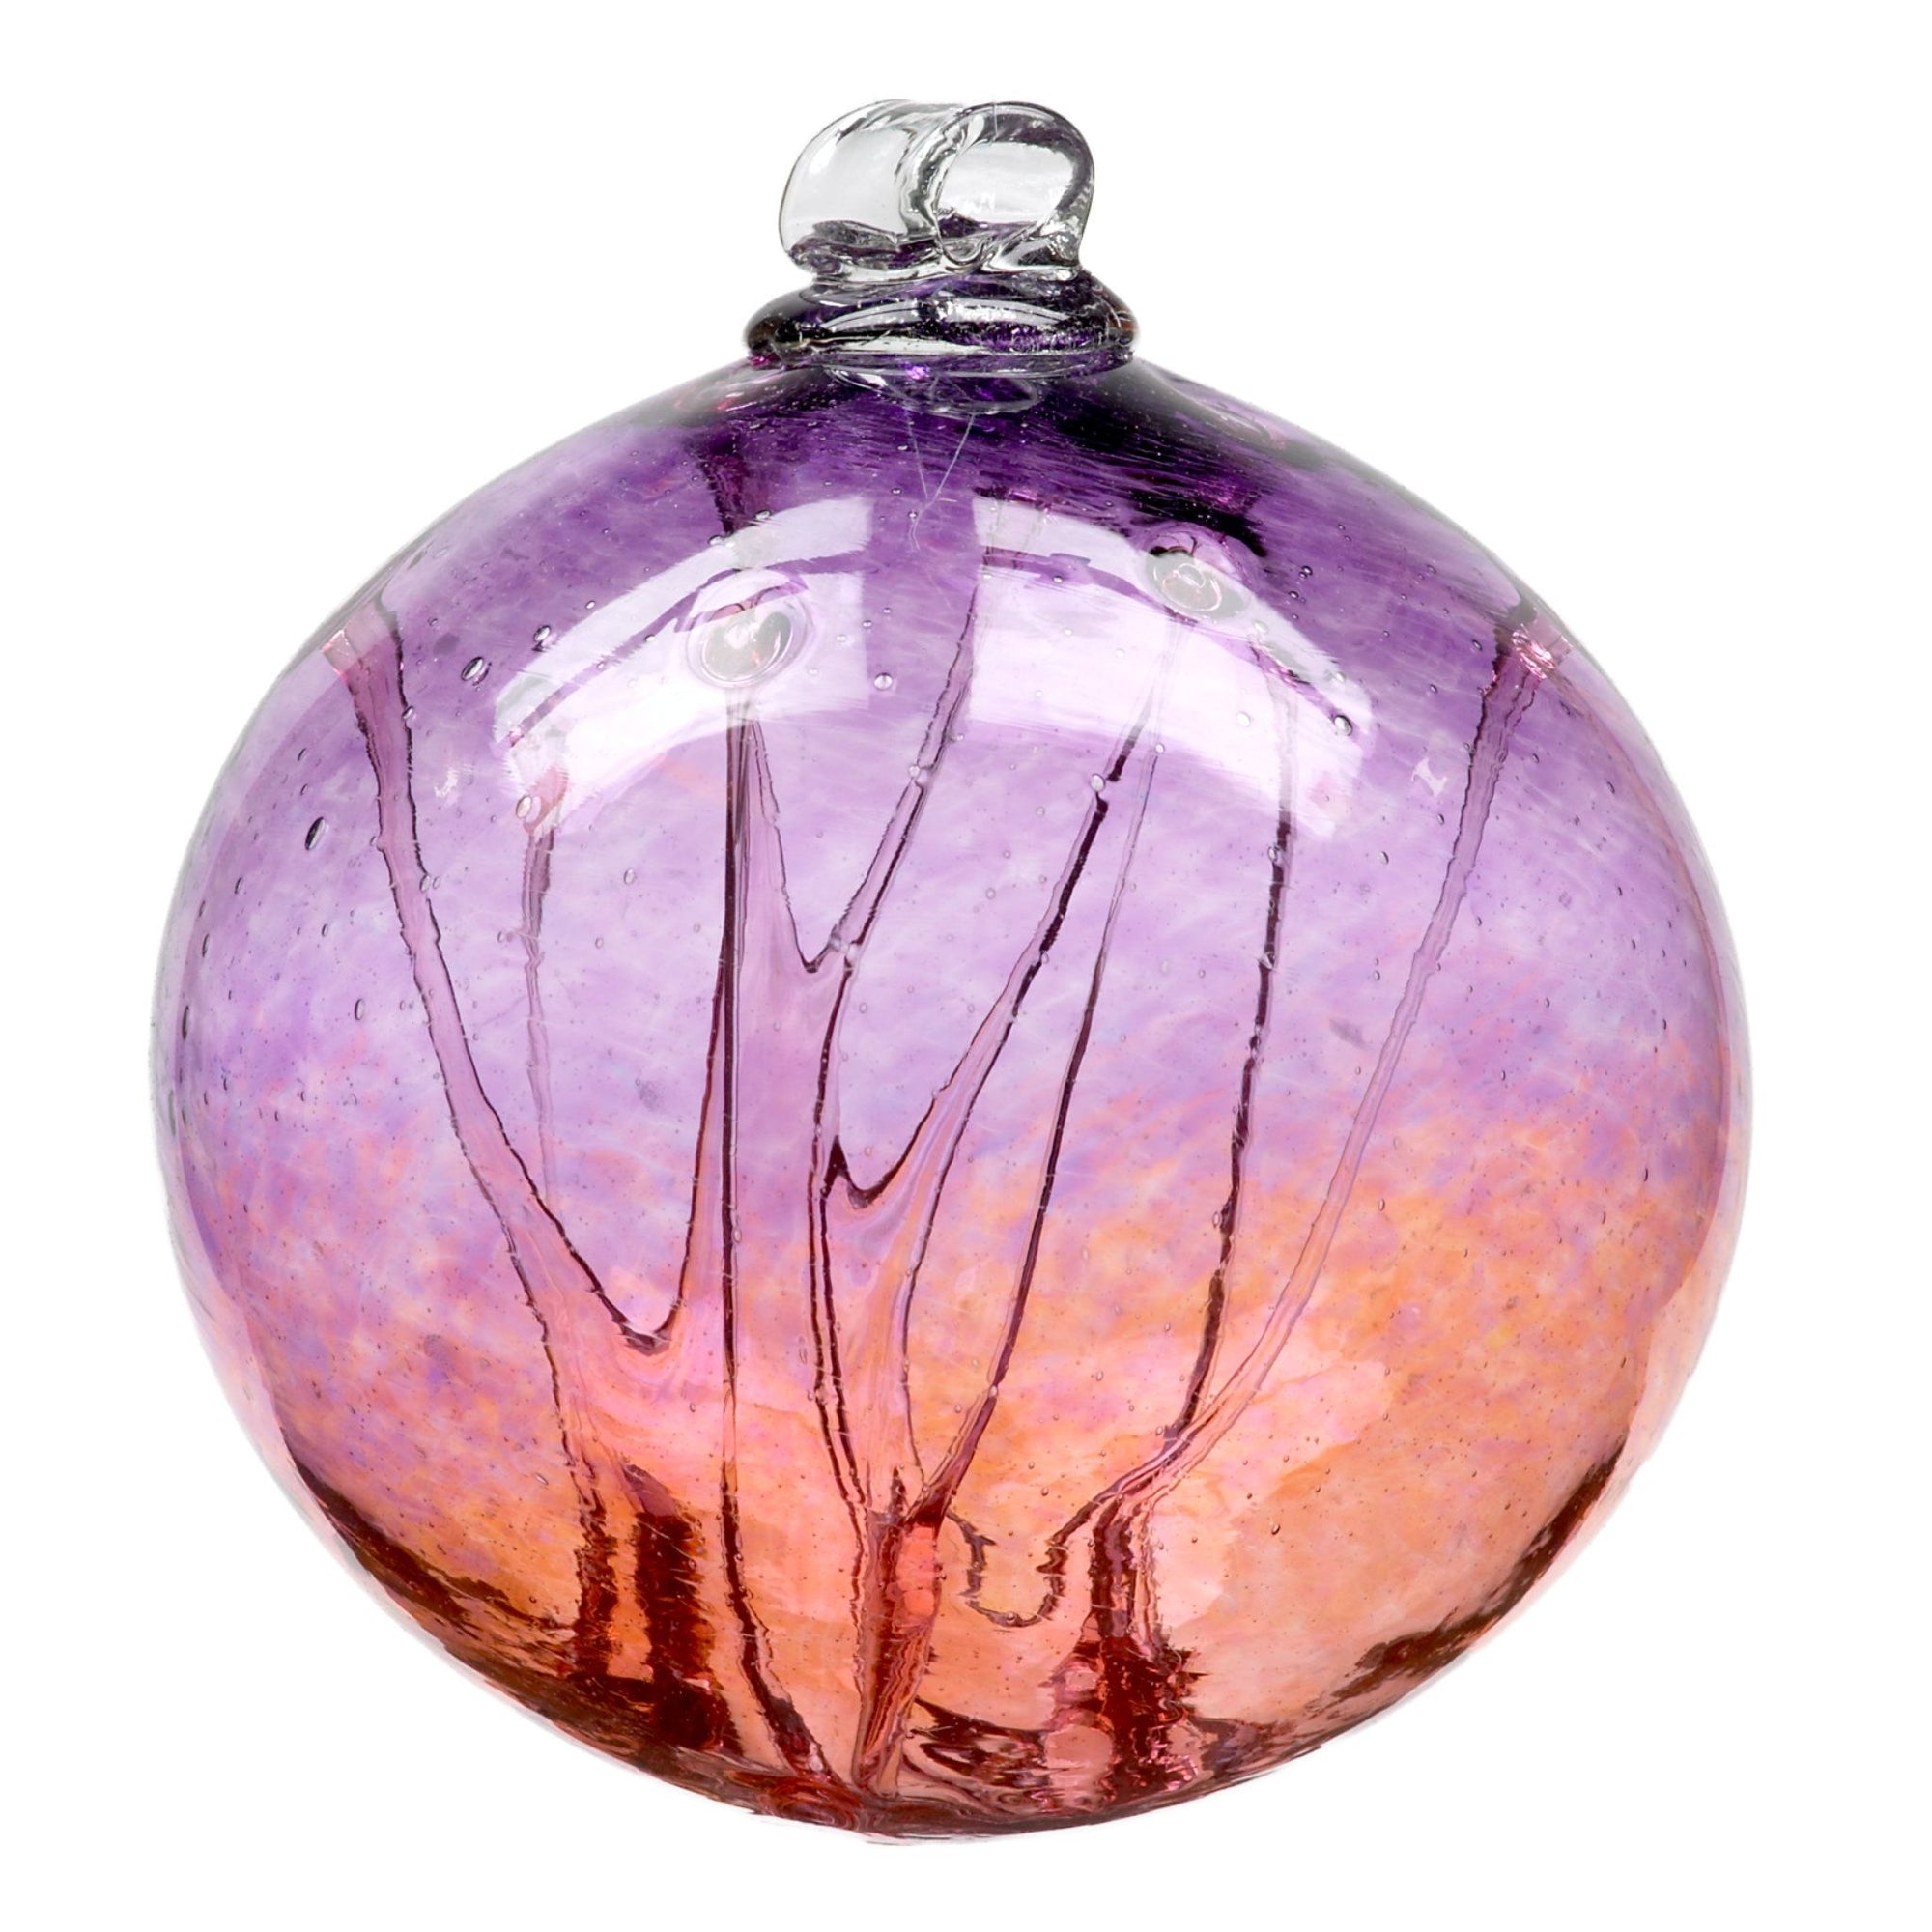 Olde English Witch Ball | Pink/Amethyst Hand-blown Art Glass Ornament